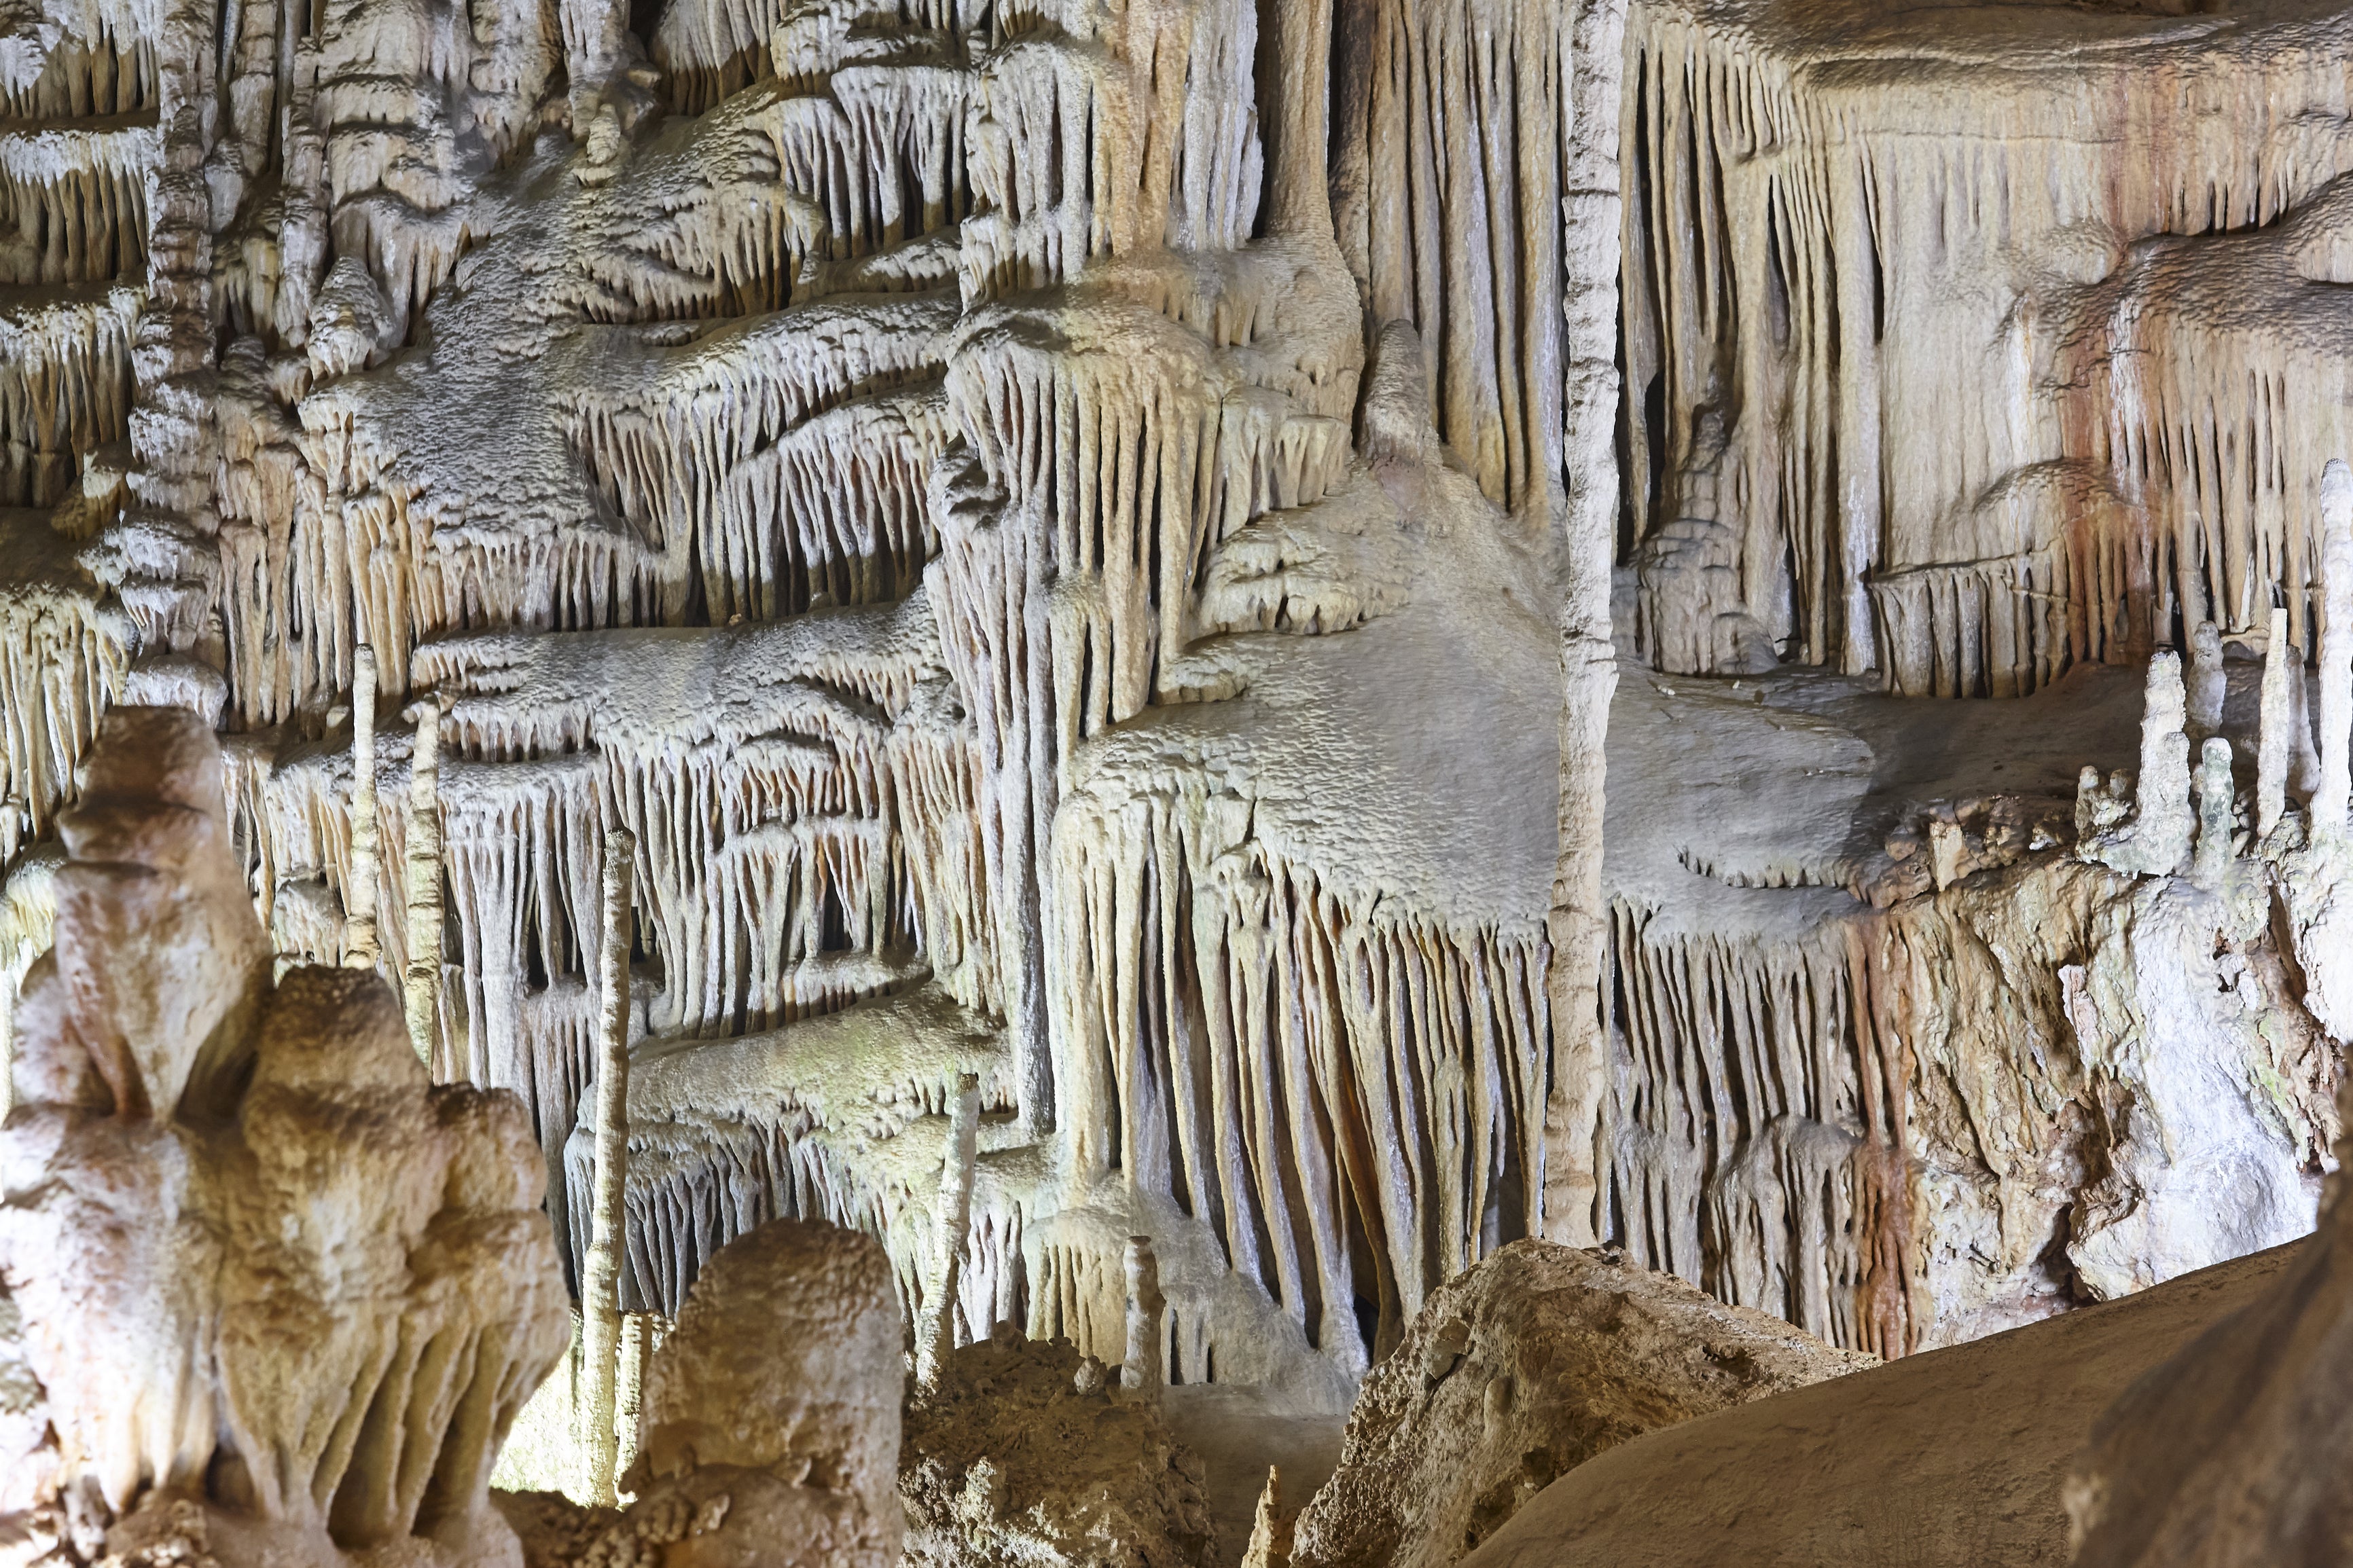 18. Explore the Caves of Campanet